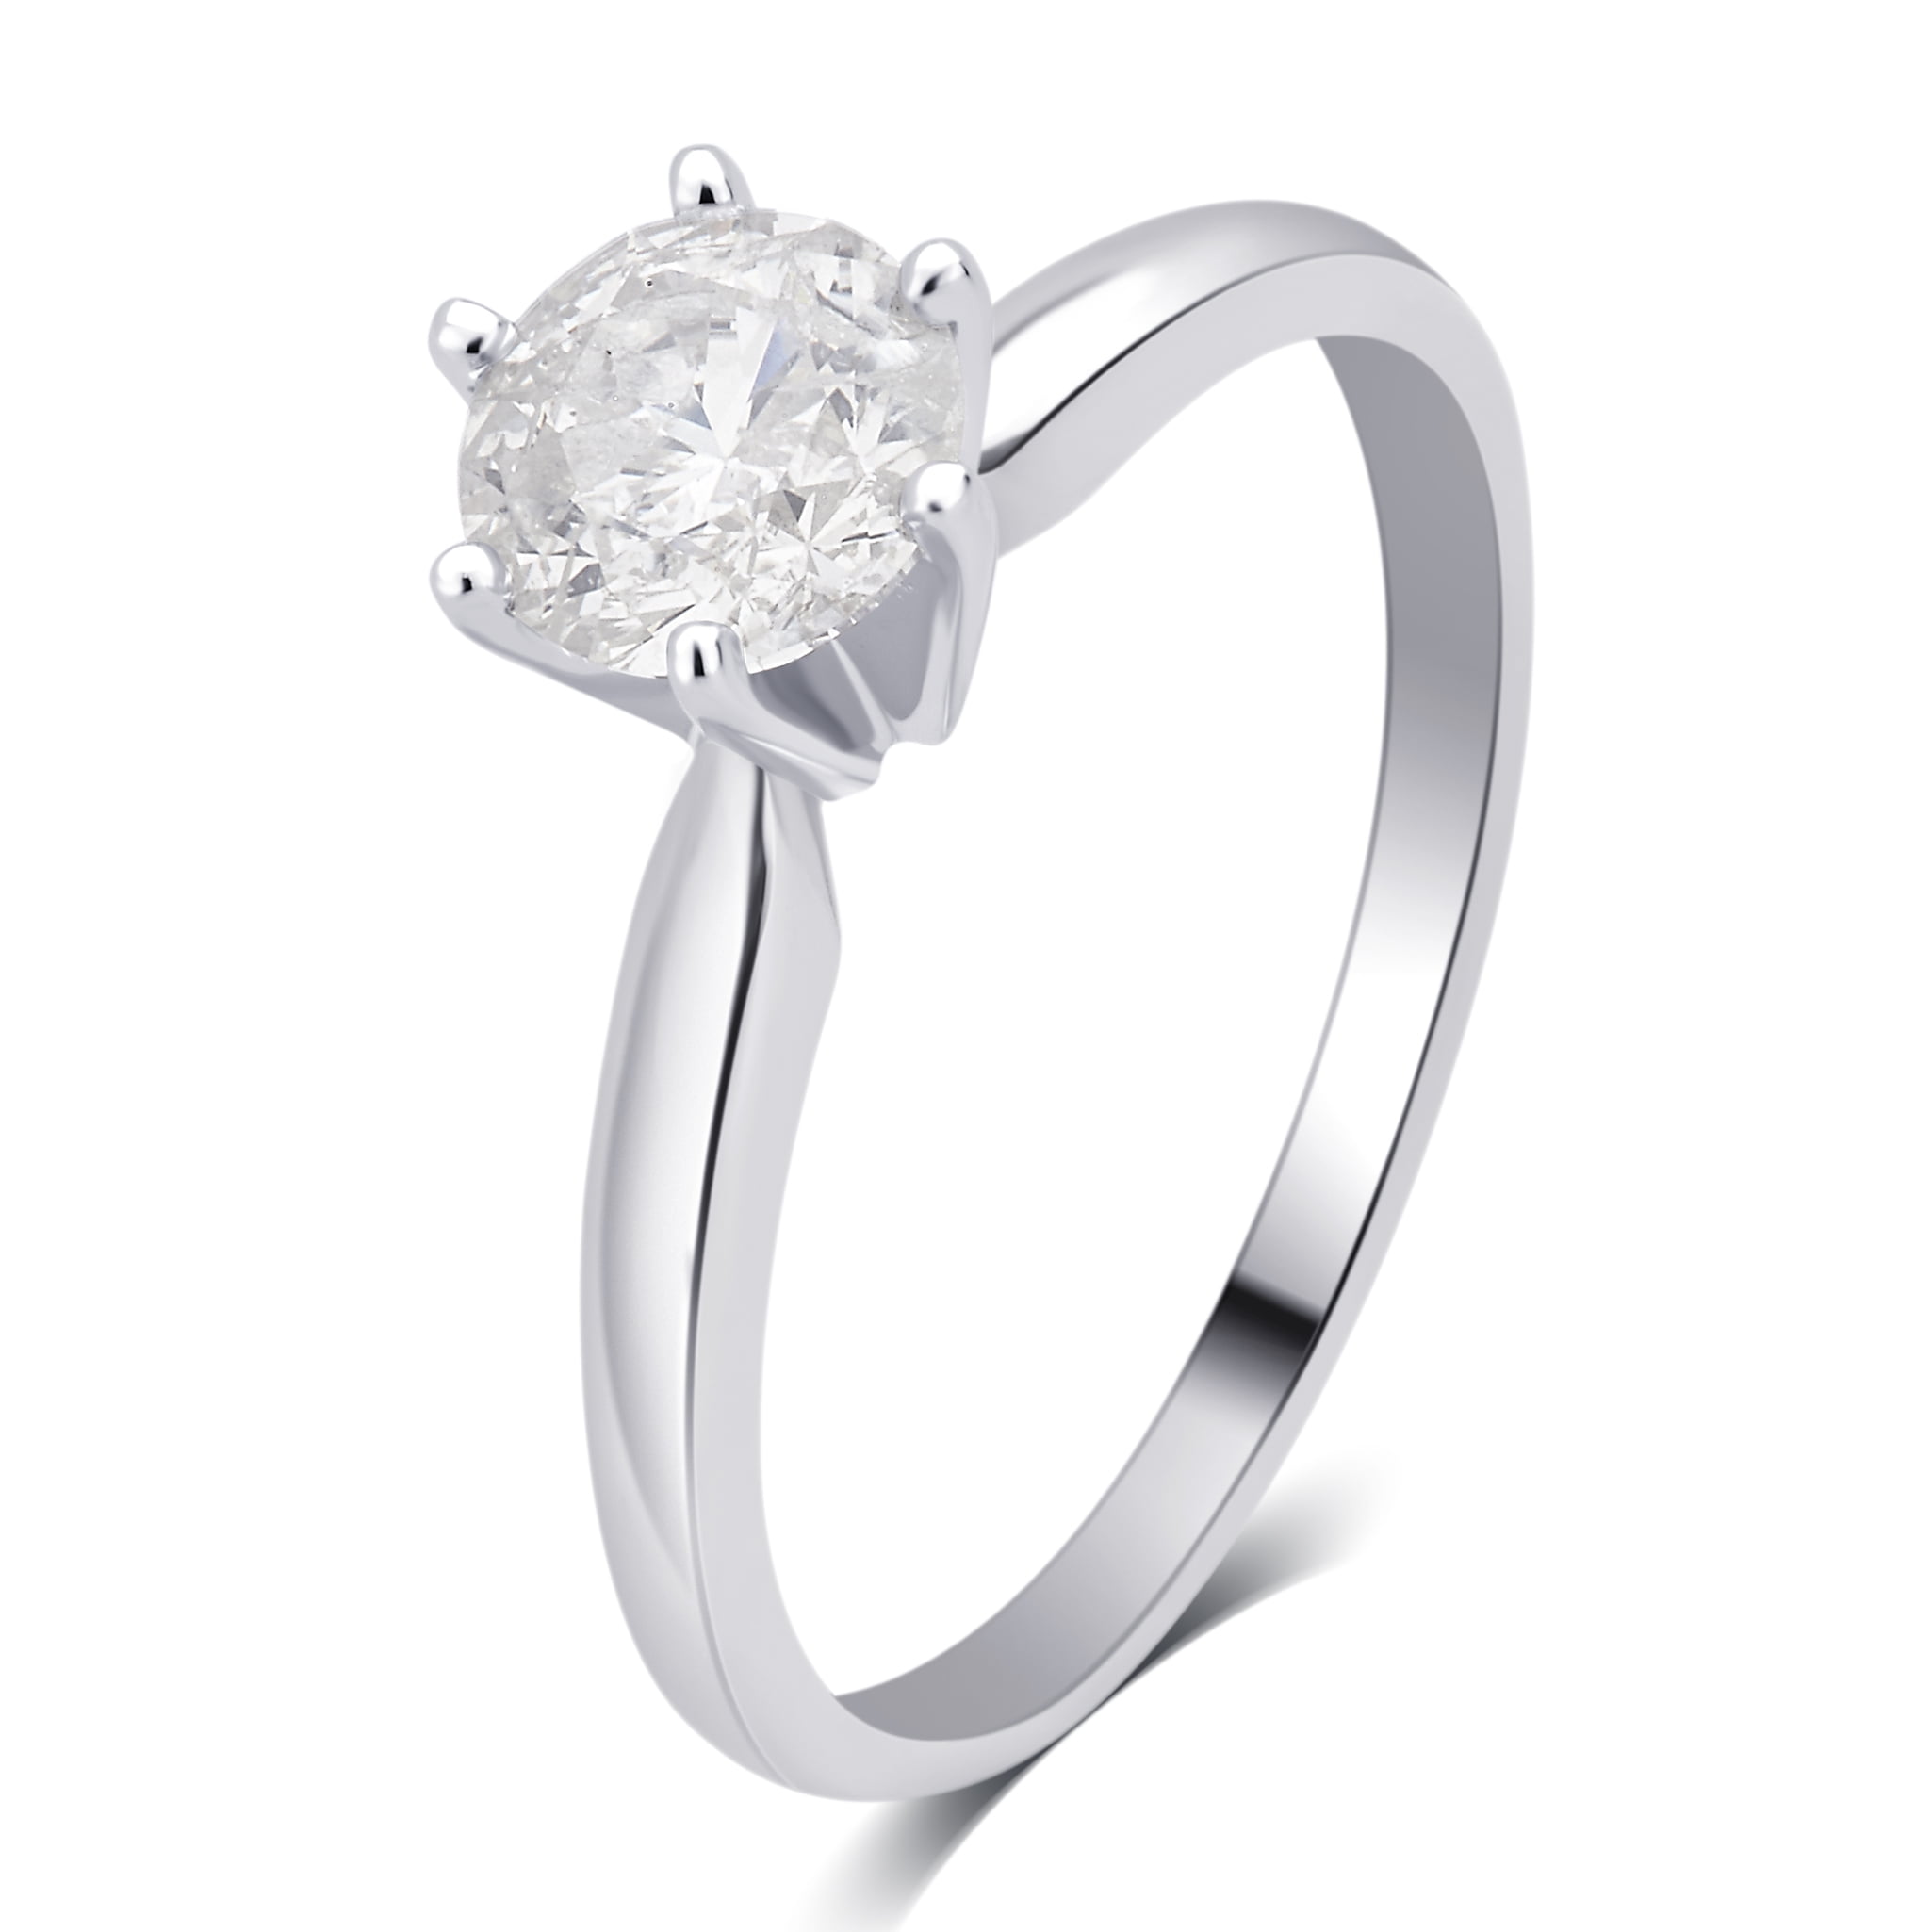 Buy 14K White Gold Diamond Ring 1/2 Carat Weight Retails for 6250.00 Online  in India - Etsy